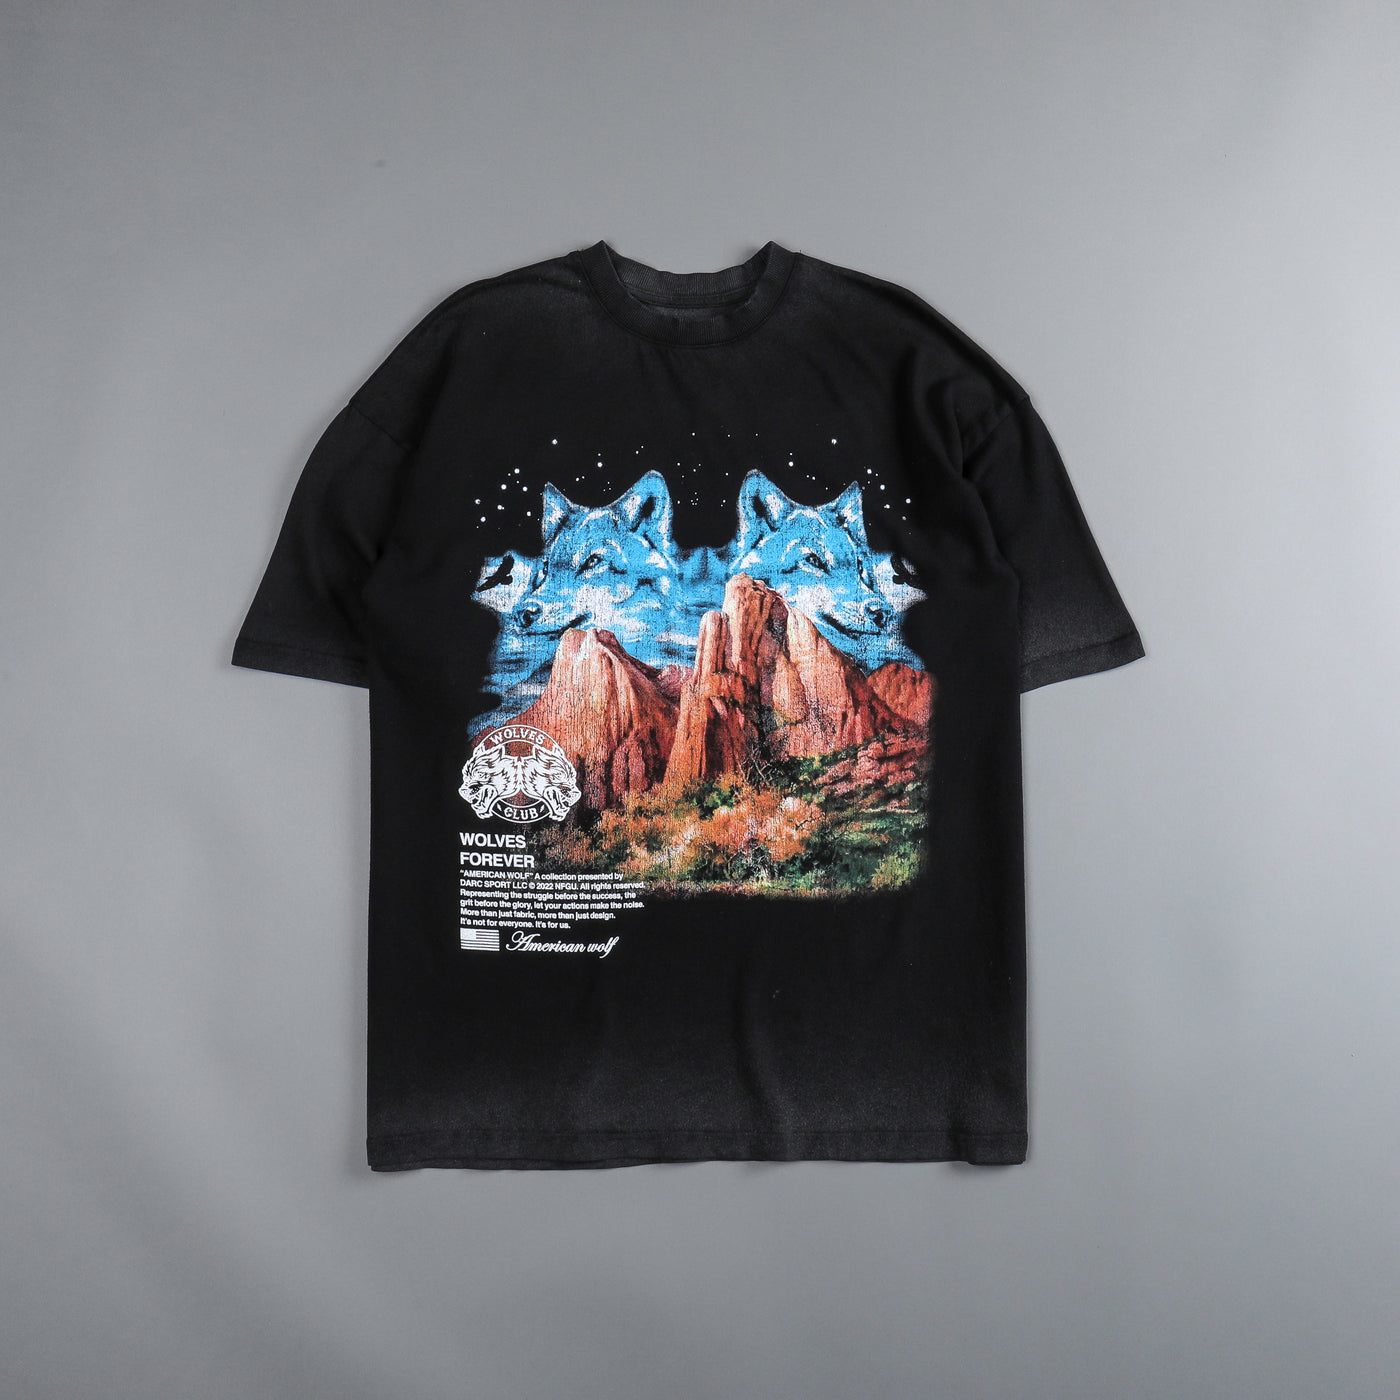 Wolves Canyon "Premium Vintage" Tee in Black